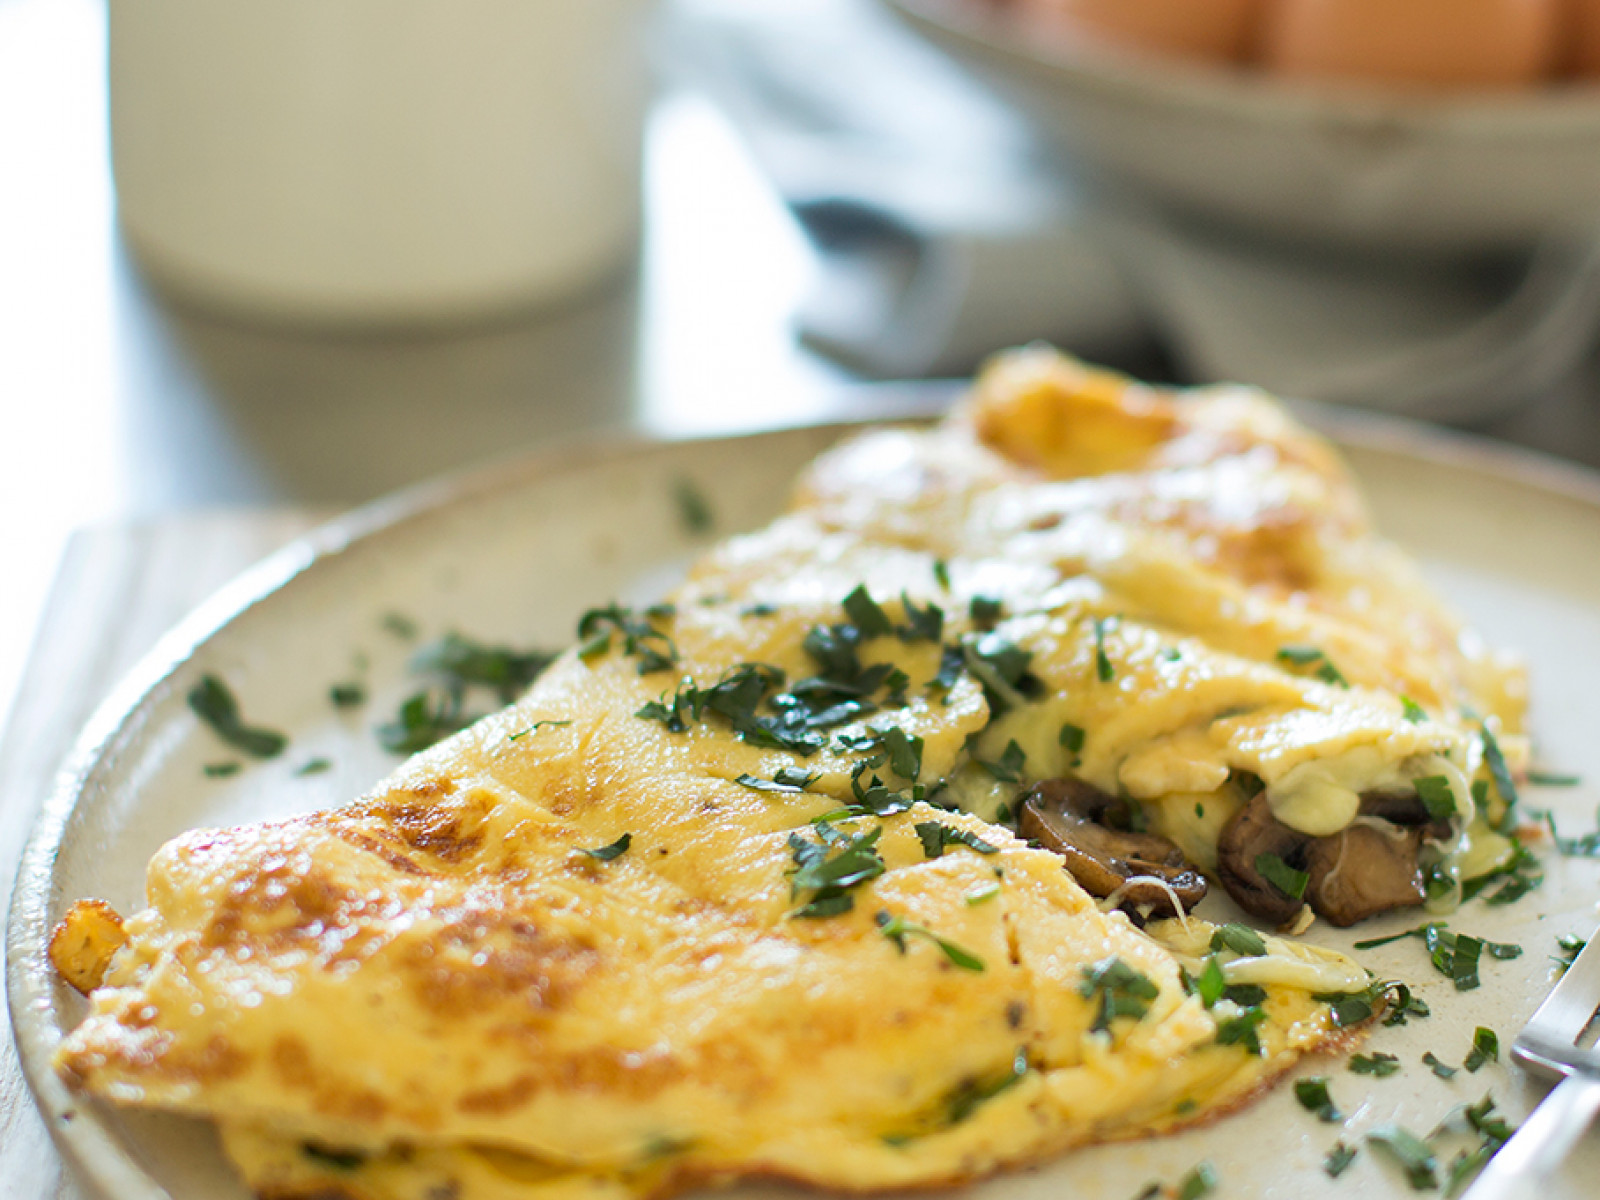 How to make an omelette Recipe | myfoodbook